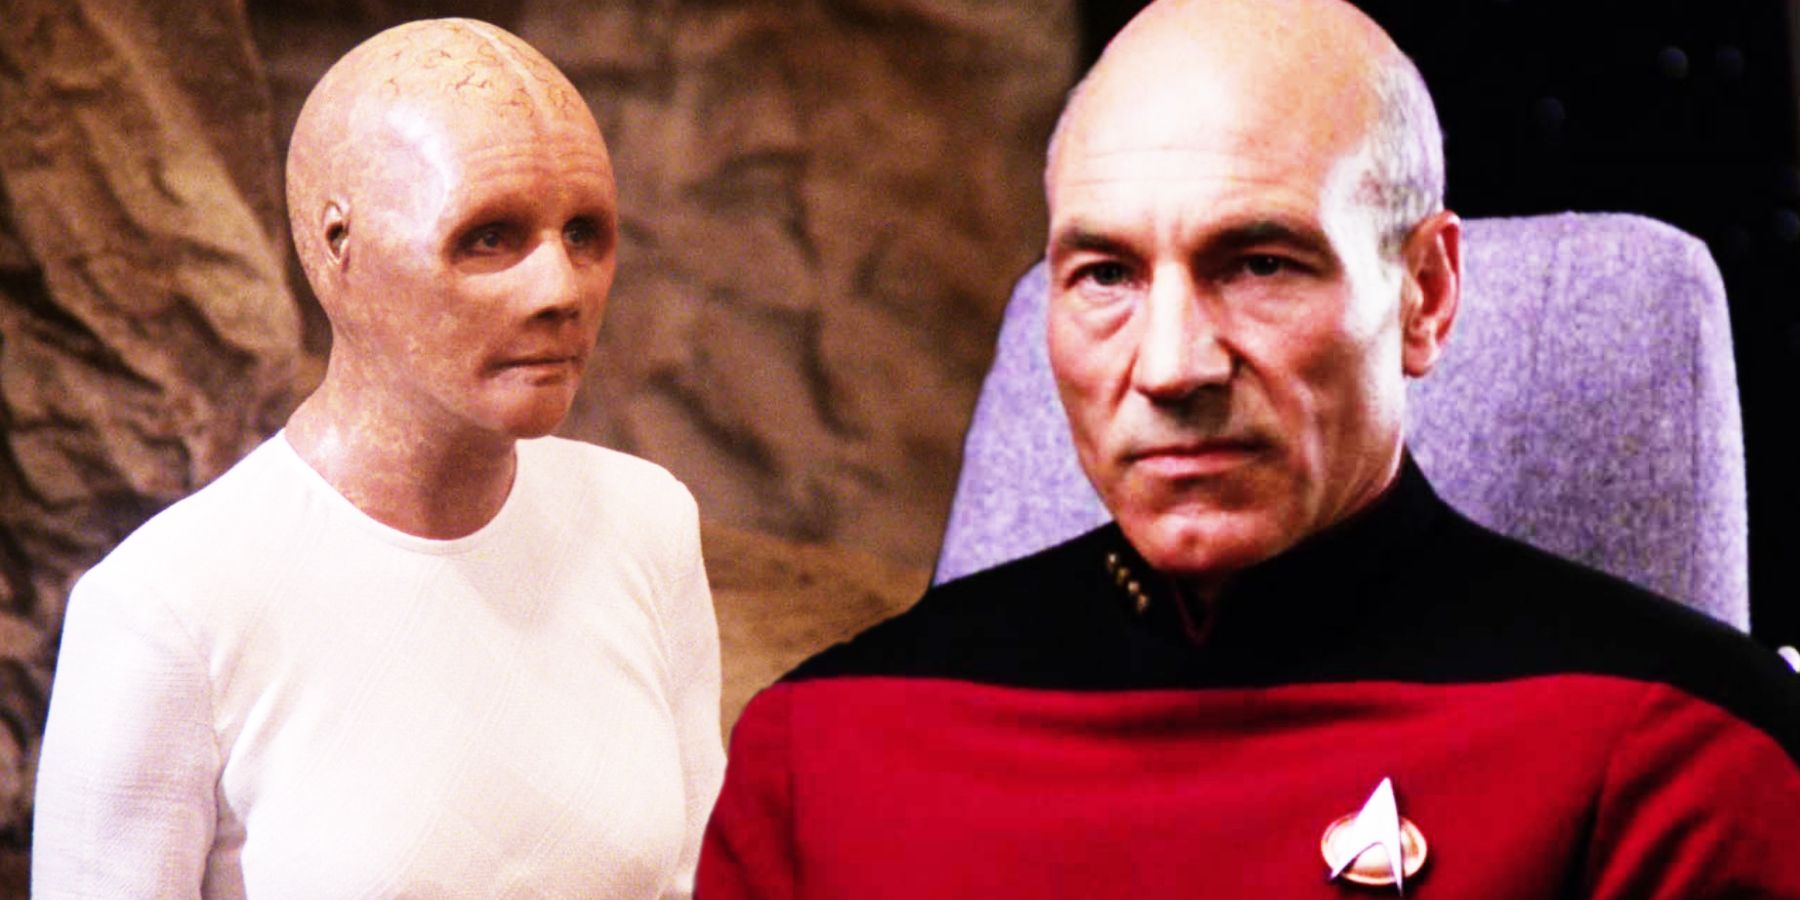 Salome Jens as the ancient humanoid and Patrick Stewart as Jean-Luc Picard